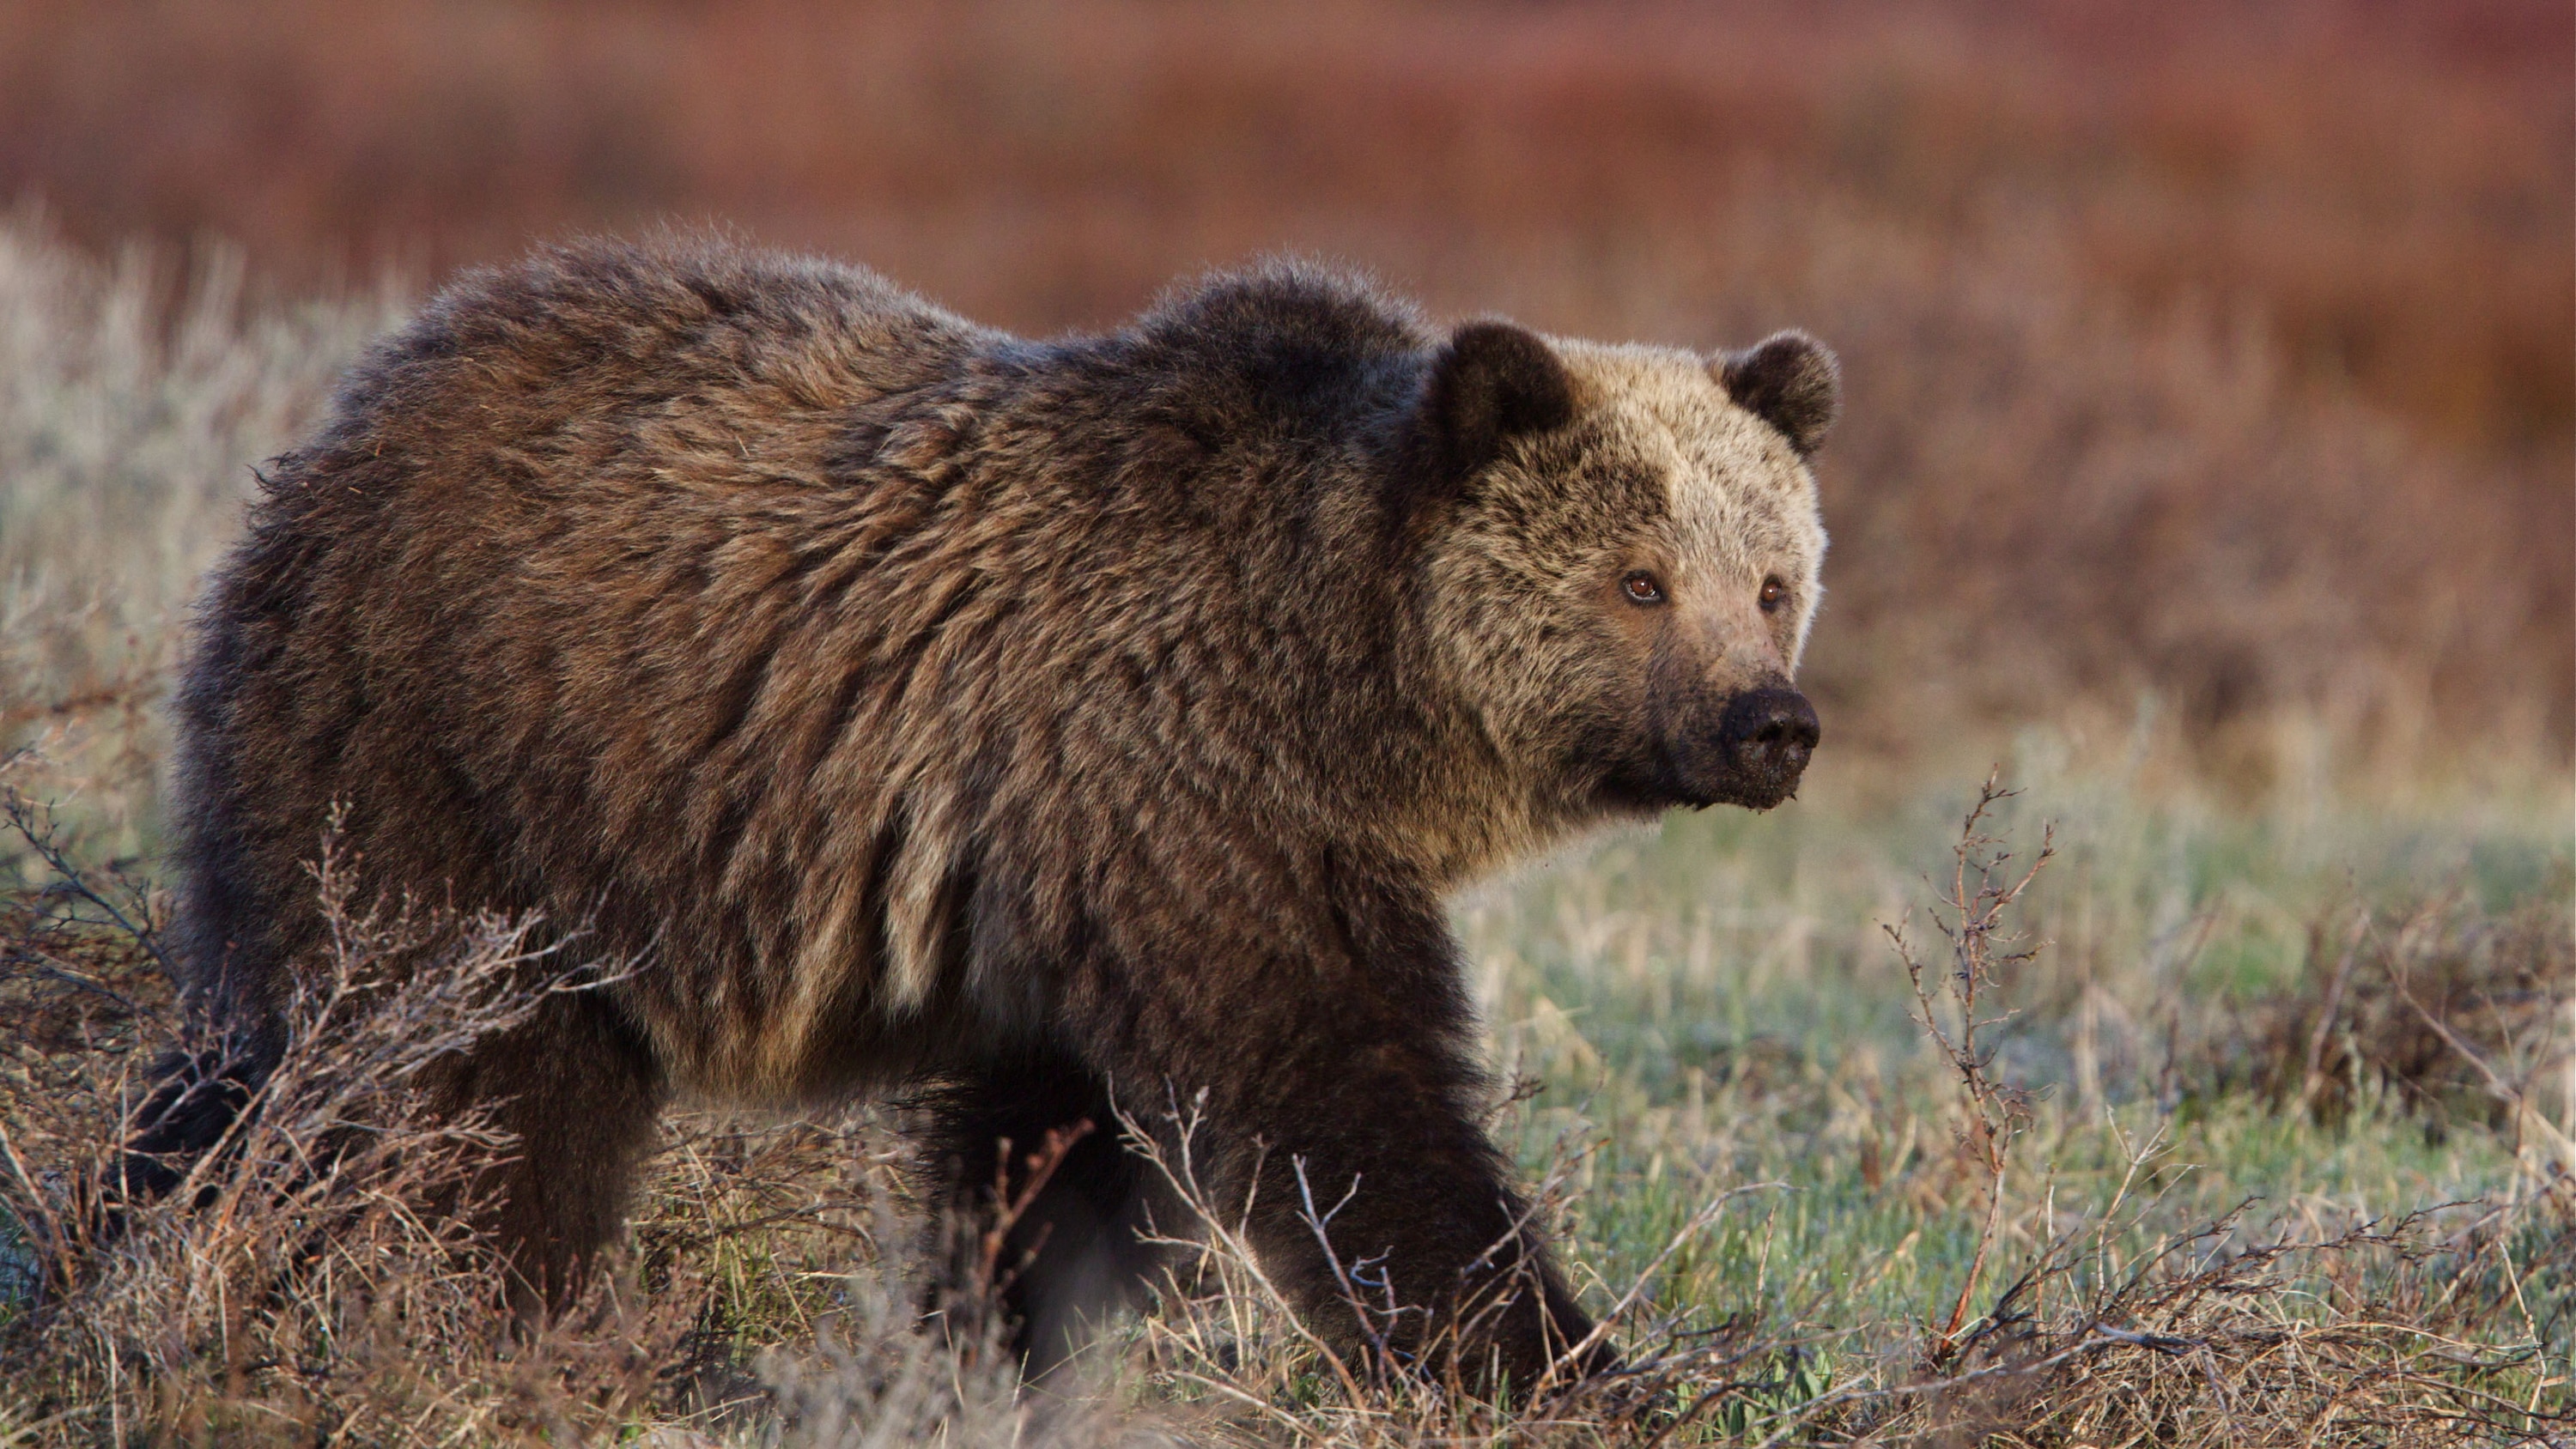 How to be good neighbours with grizzly bears